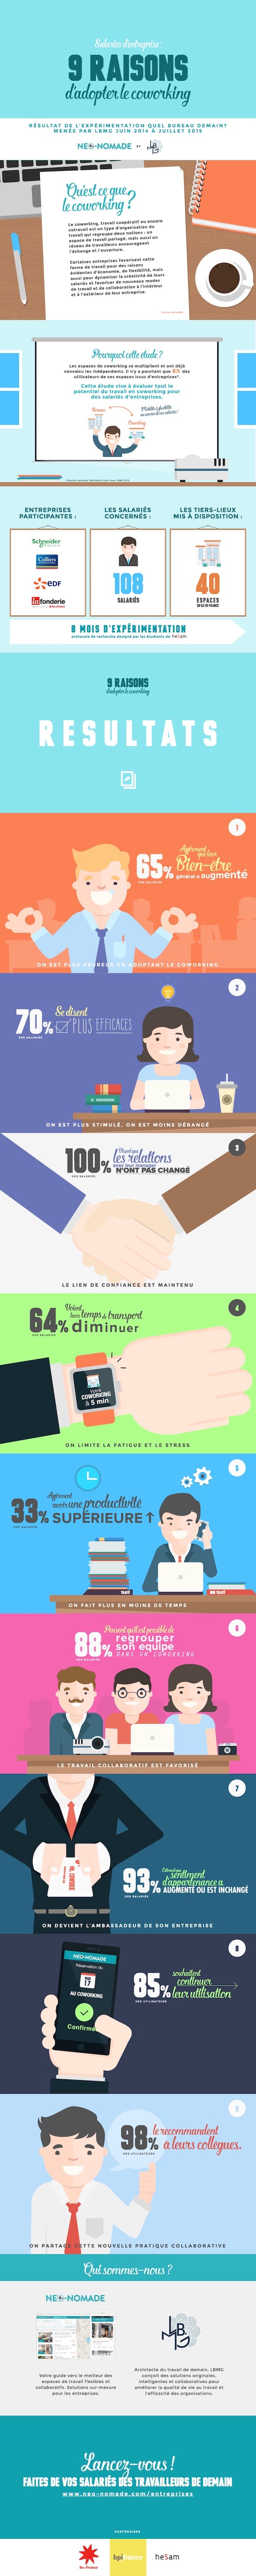 Coworking-infographie